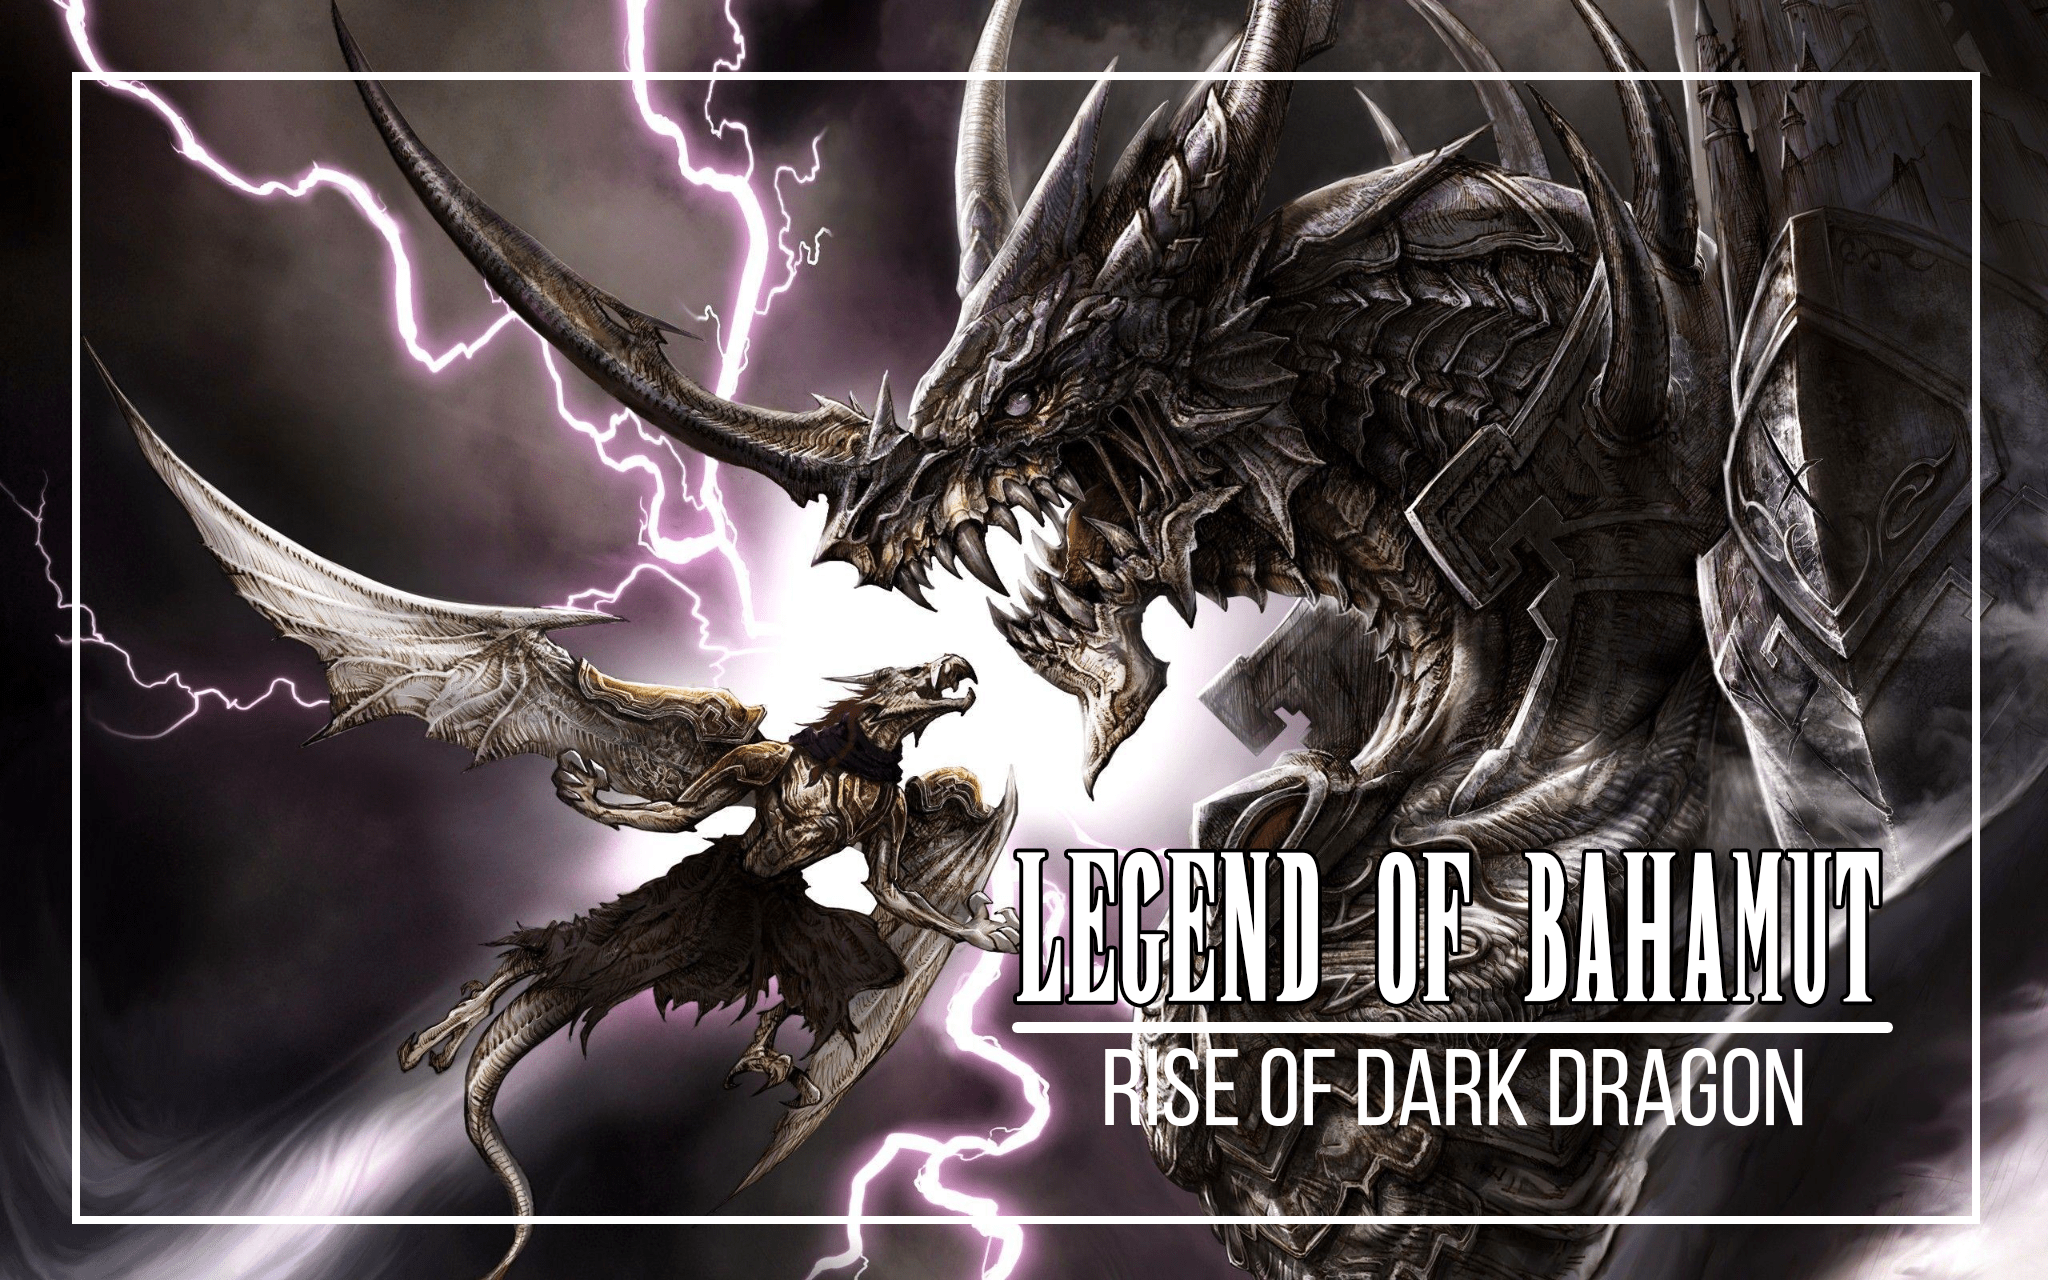 NEW! - Legend of Bahamut: Rise of Dark Dragon - An epic Dragon themed D&D campaign!